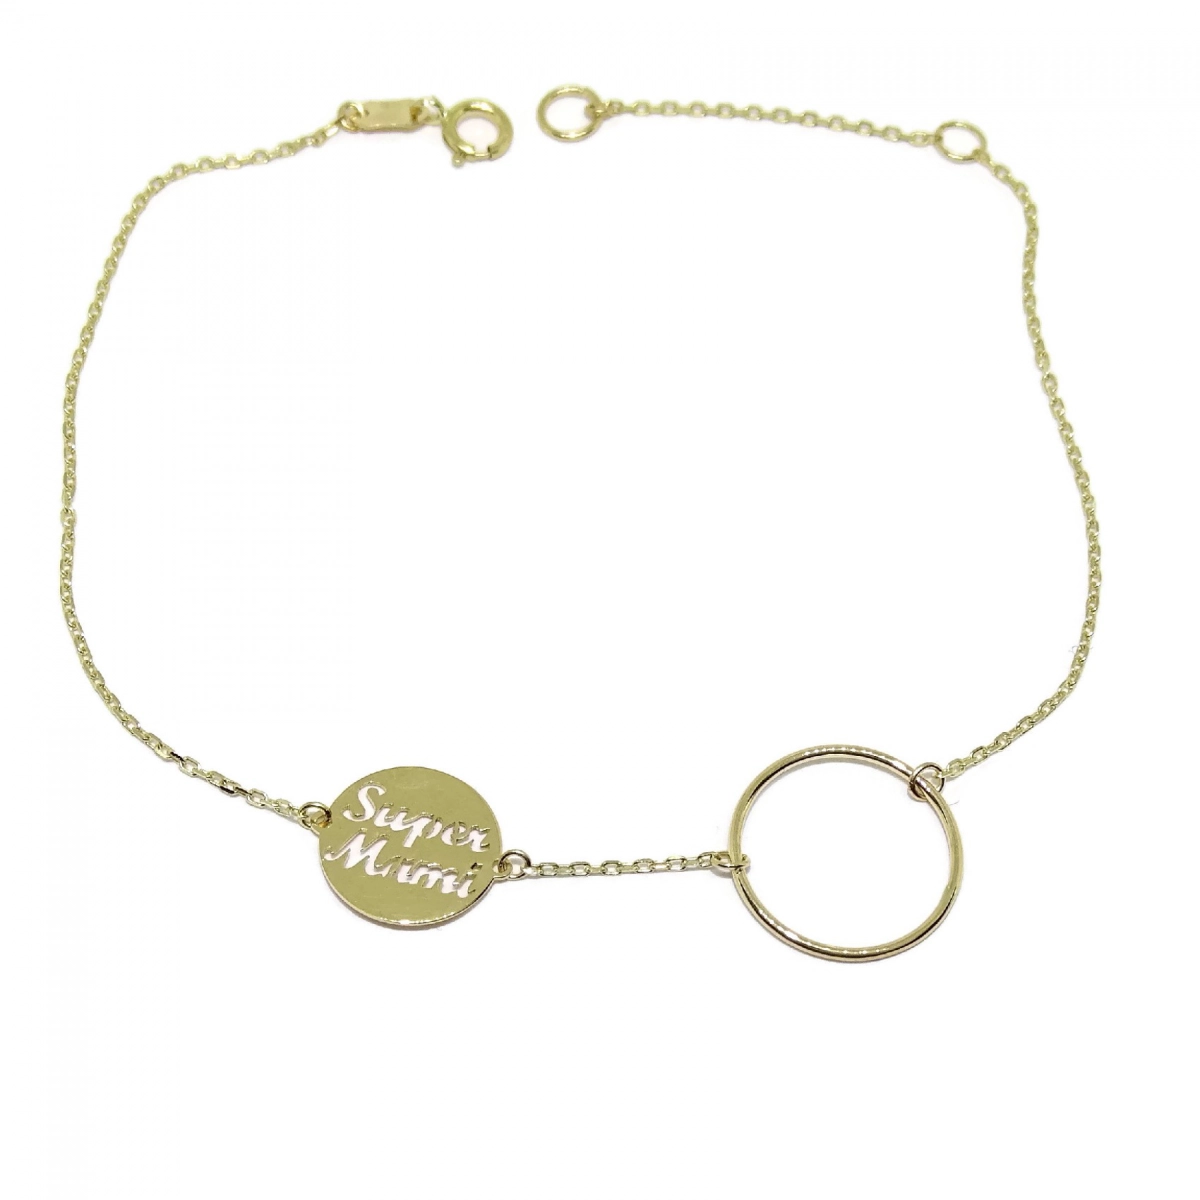 BRACELET OF YELLOW GOLD OF 18K WITH REASON KARMA AND CIRCLE SUPER MOMMY. 18.5 CM NEVER SAY NEVER